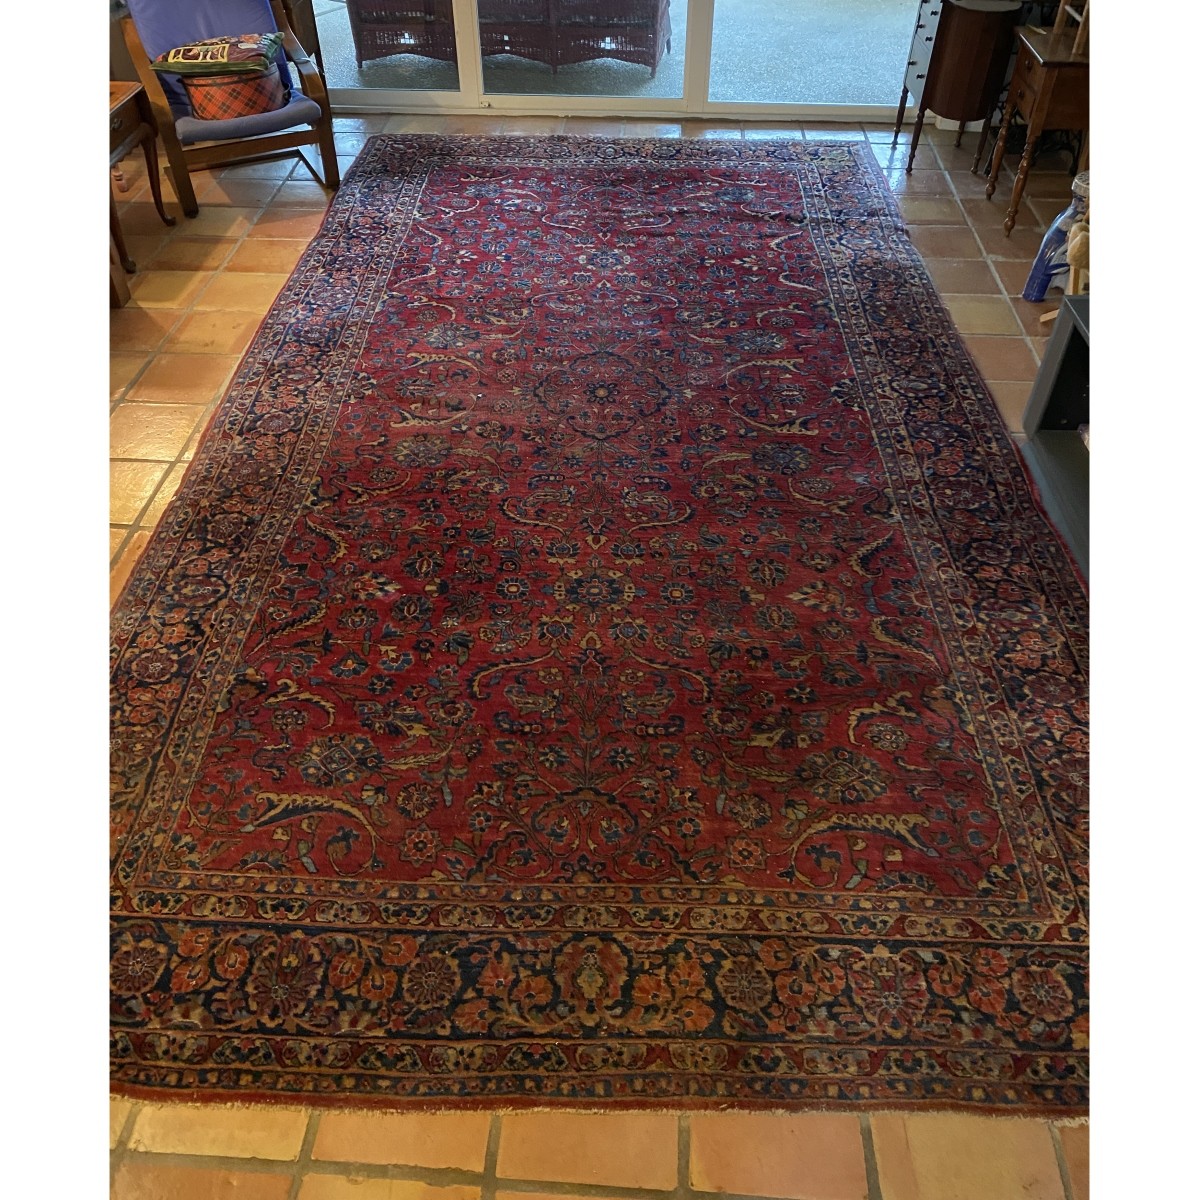 Large Mid 20th C. Persian Rug